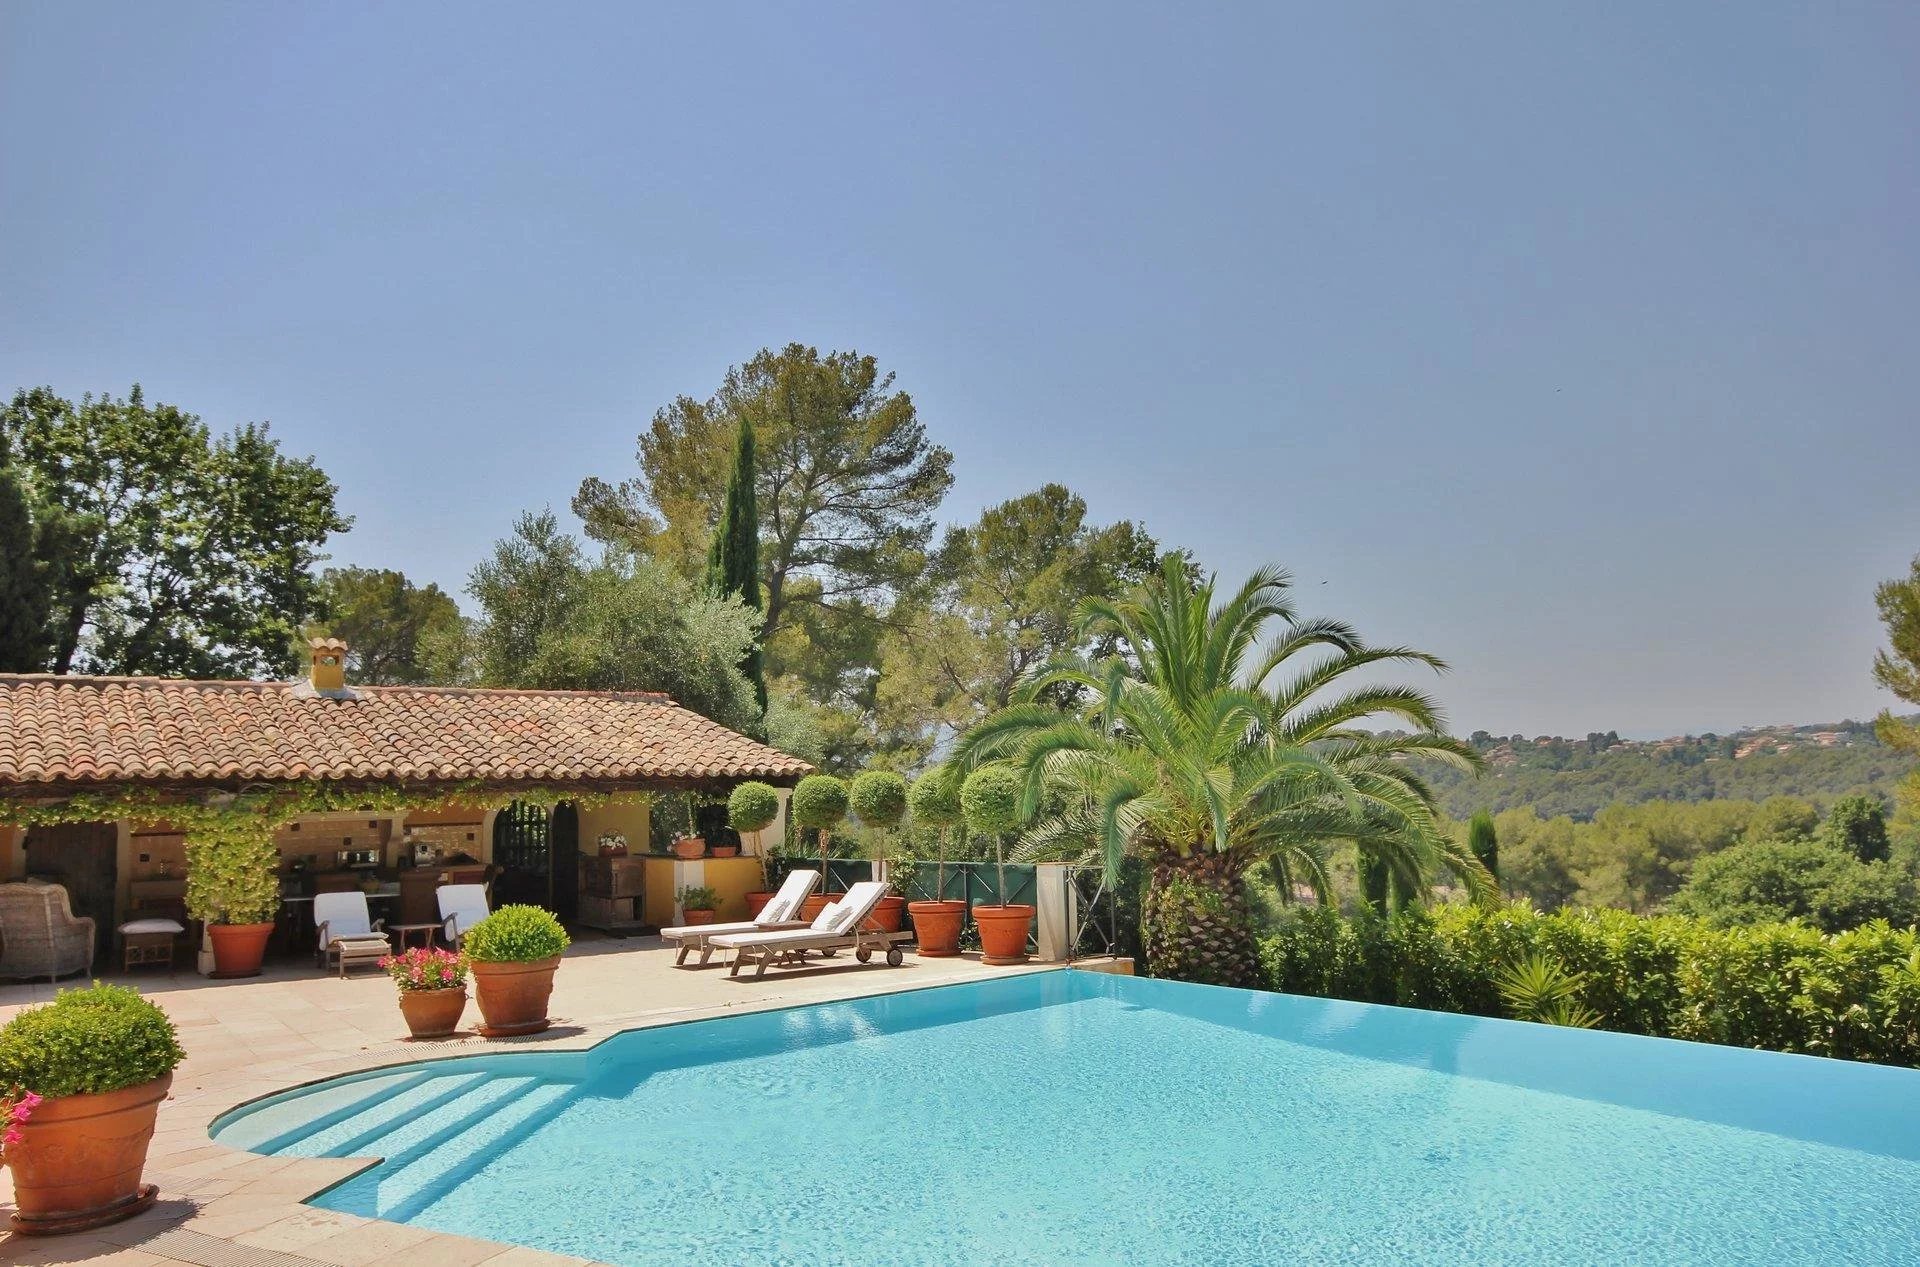 Beautiful provencal villa with vast garden and pool